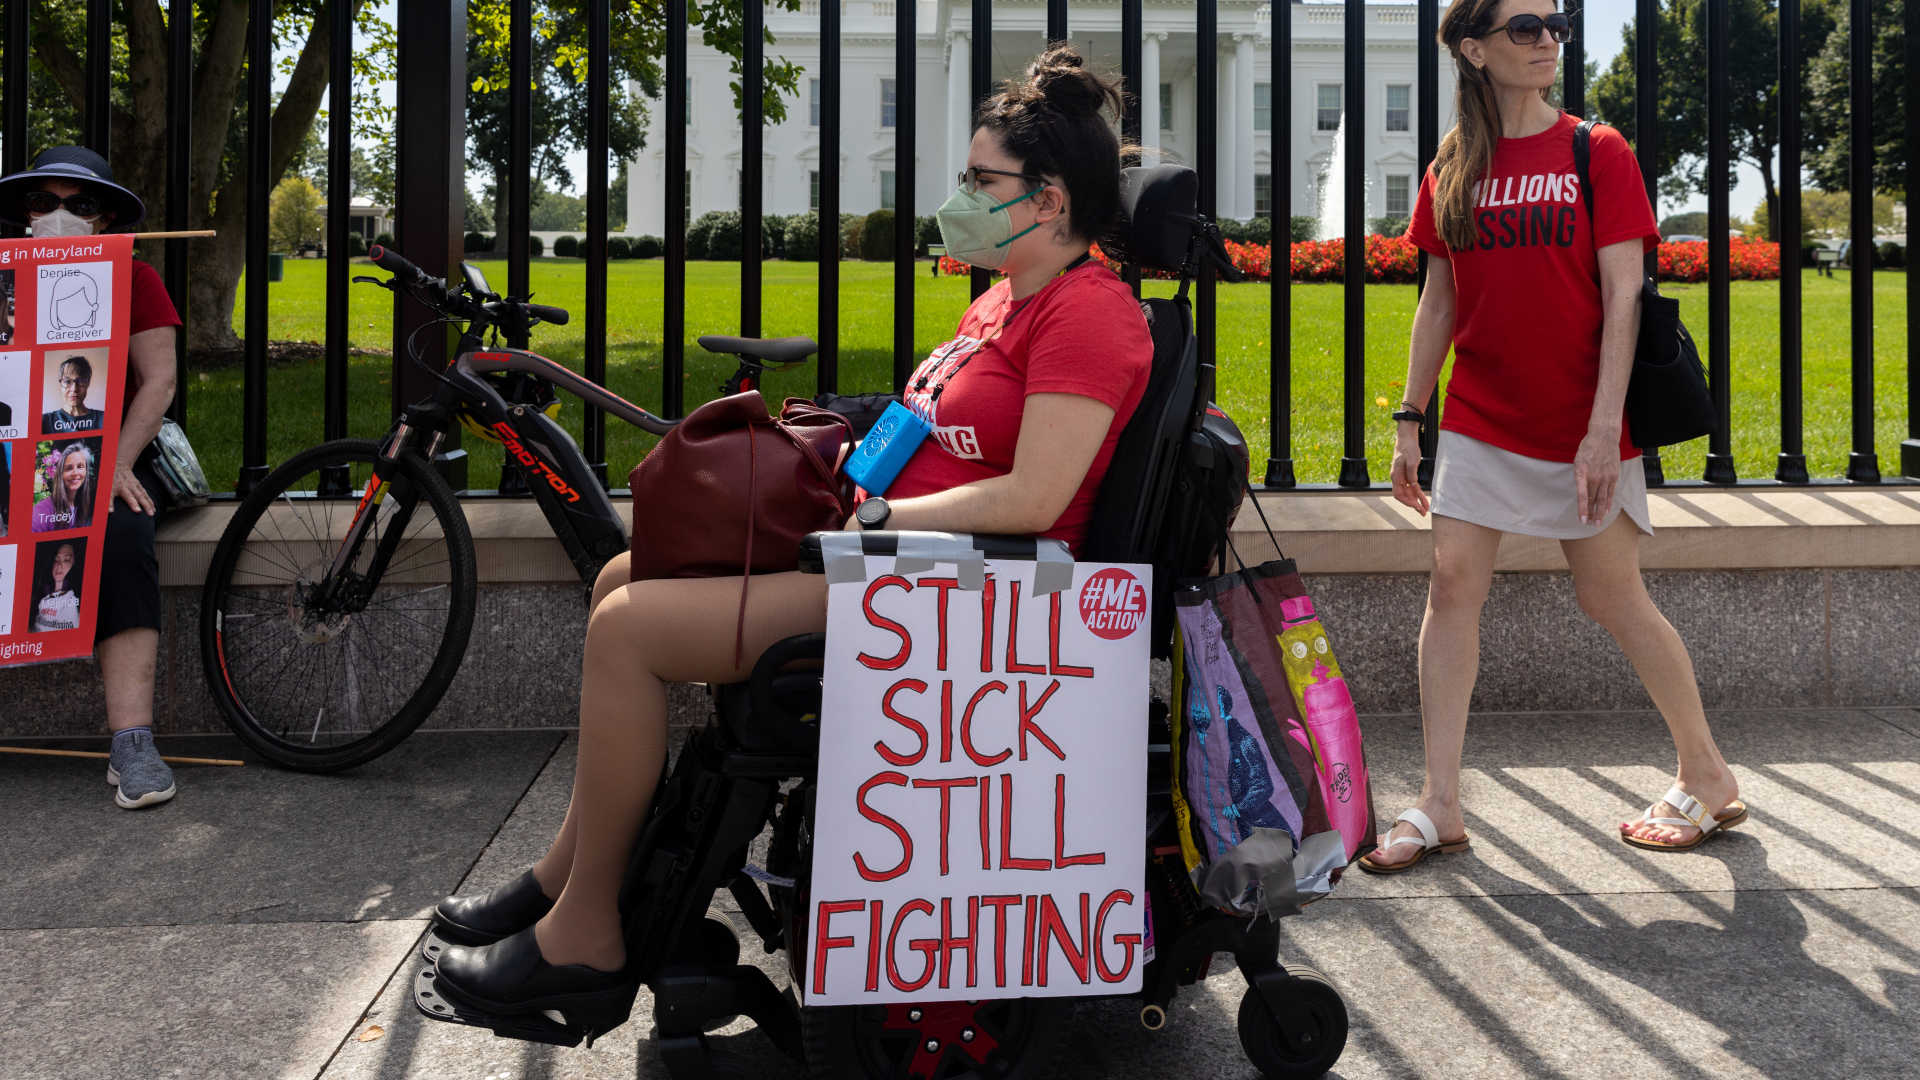 In 2022, protestors march outside the White House to call attention to those with ME/CFS and long Covid.